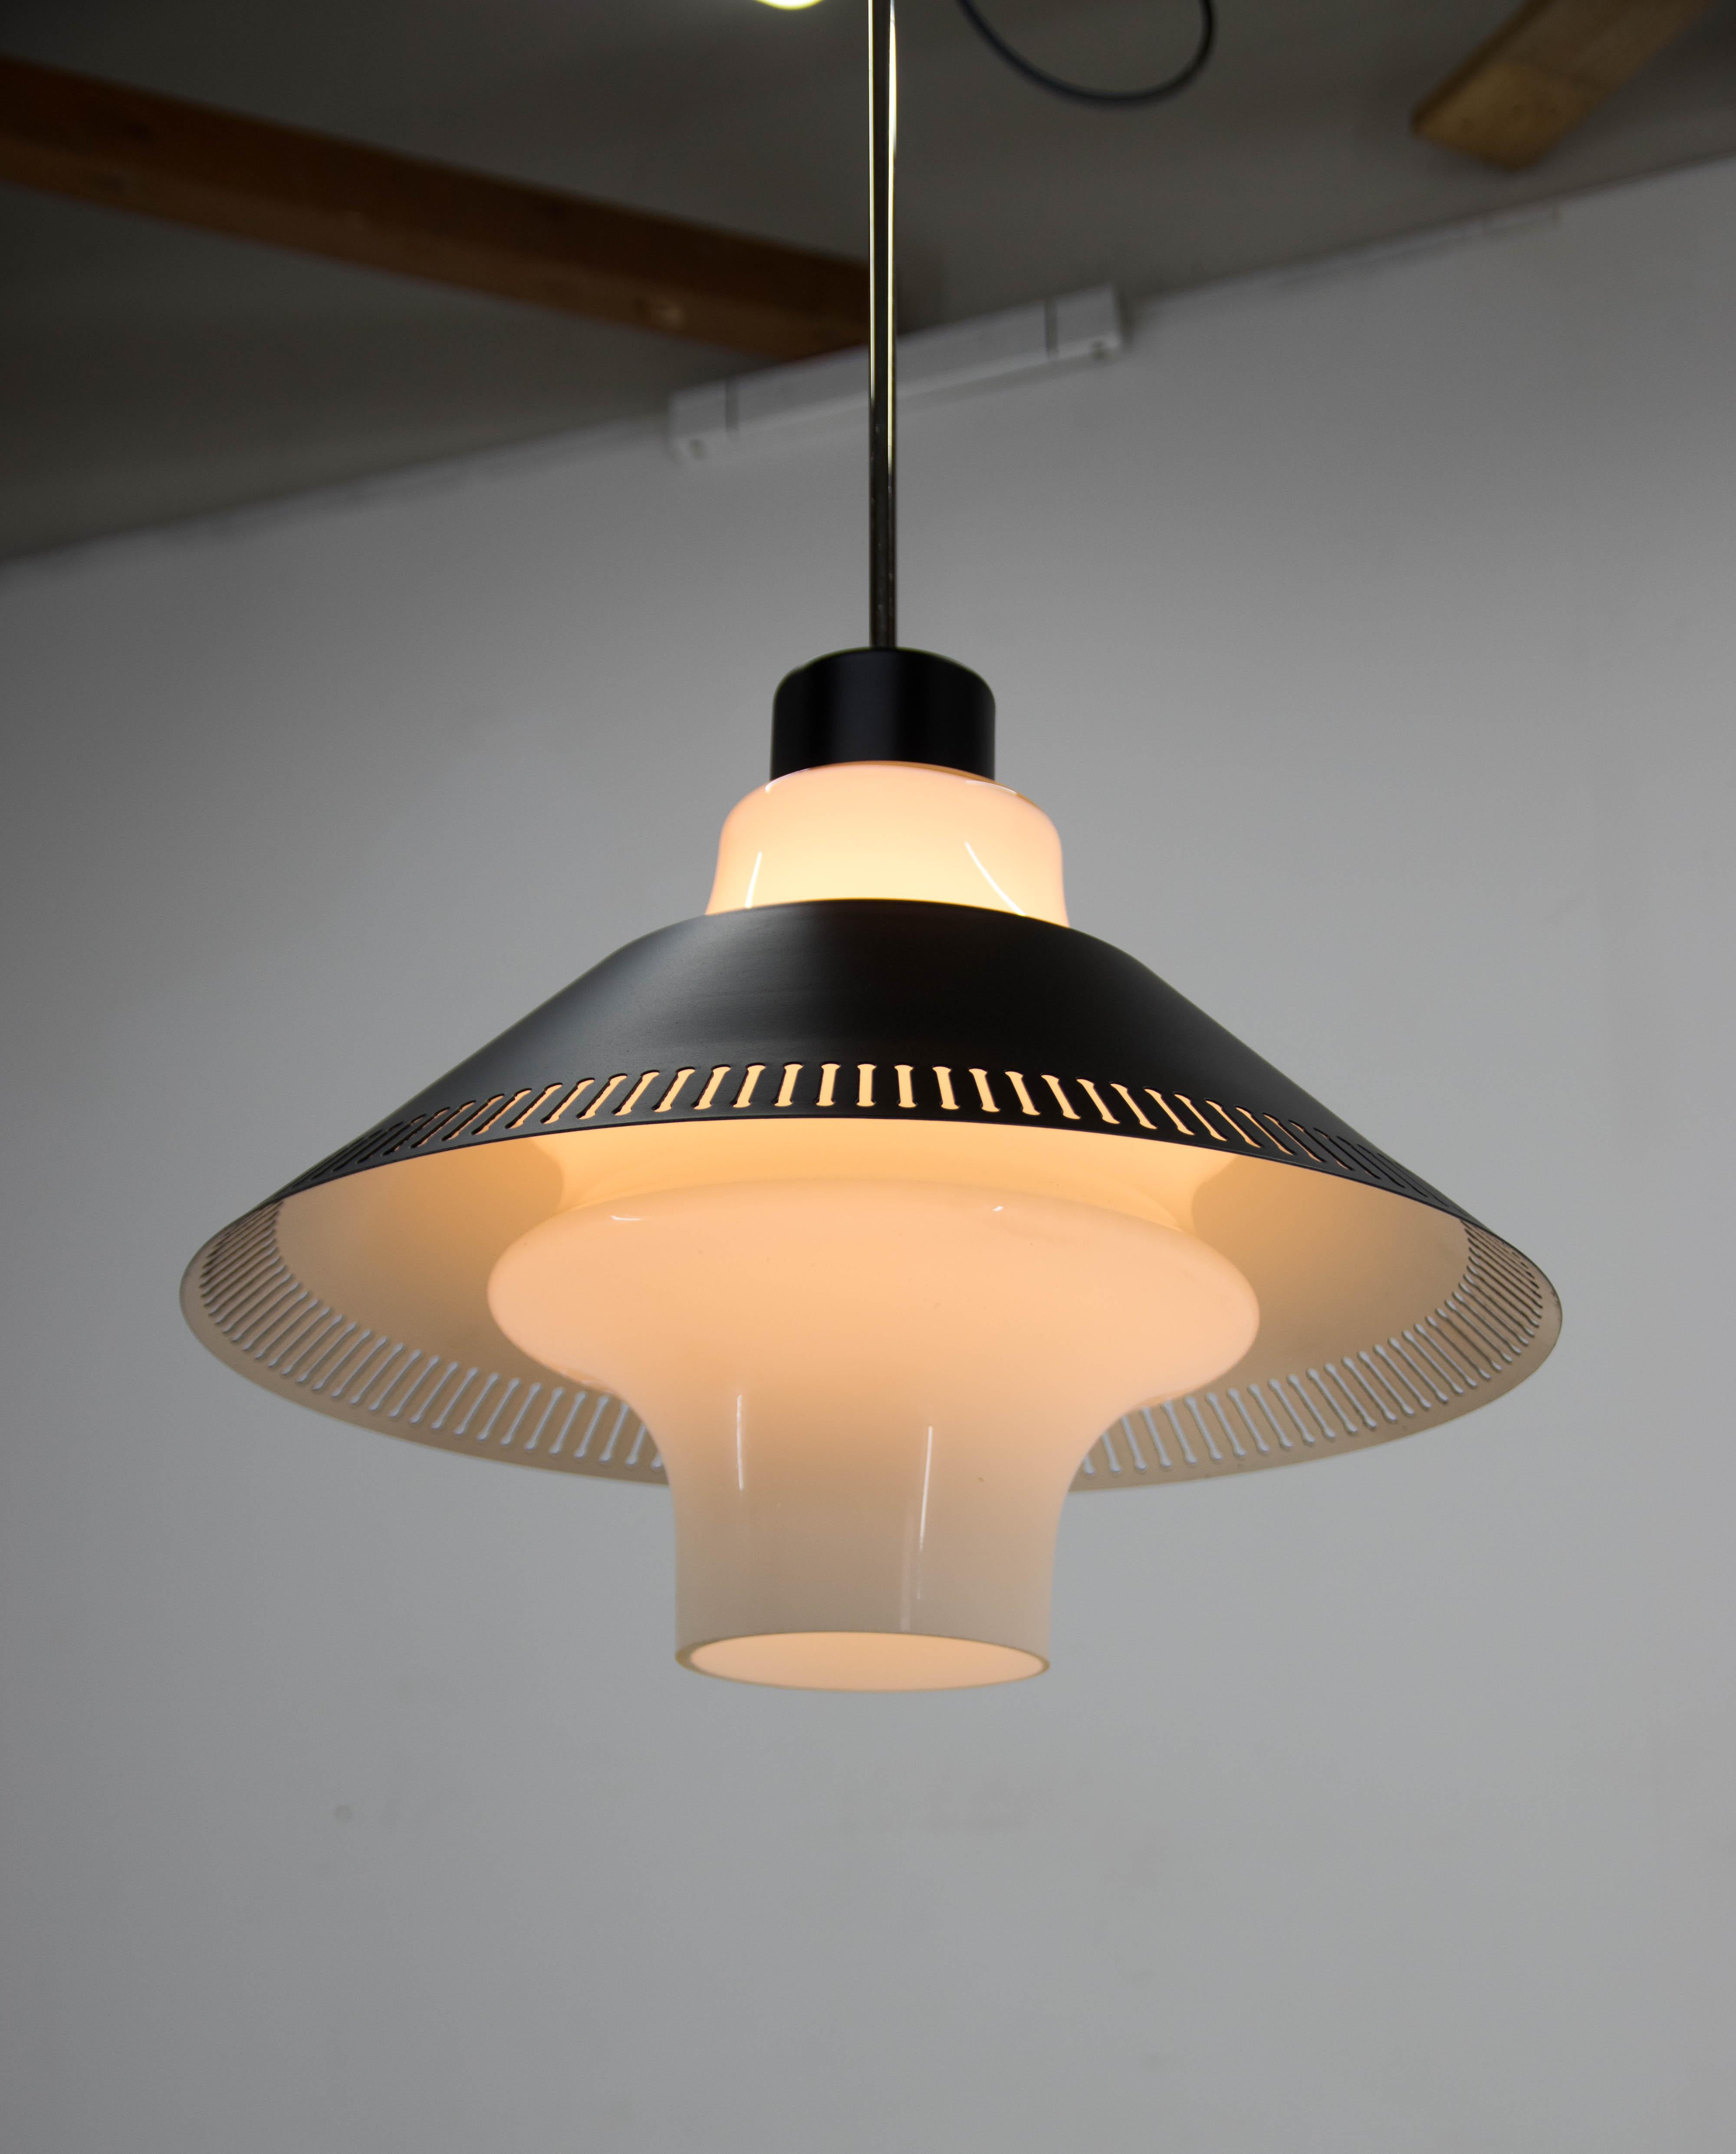 Mid-century glass and black painted metal pendant. Restored: new black paint on a metal shade.
Rewired:
1x60W, E25-E27bulb.
US wiring compatible.